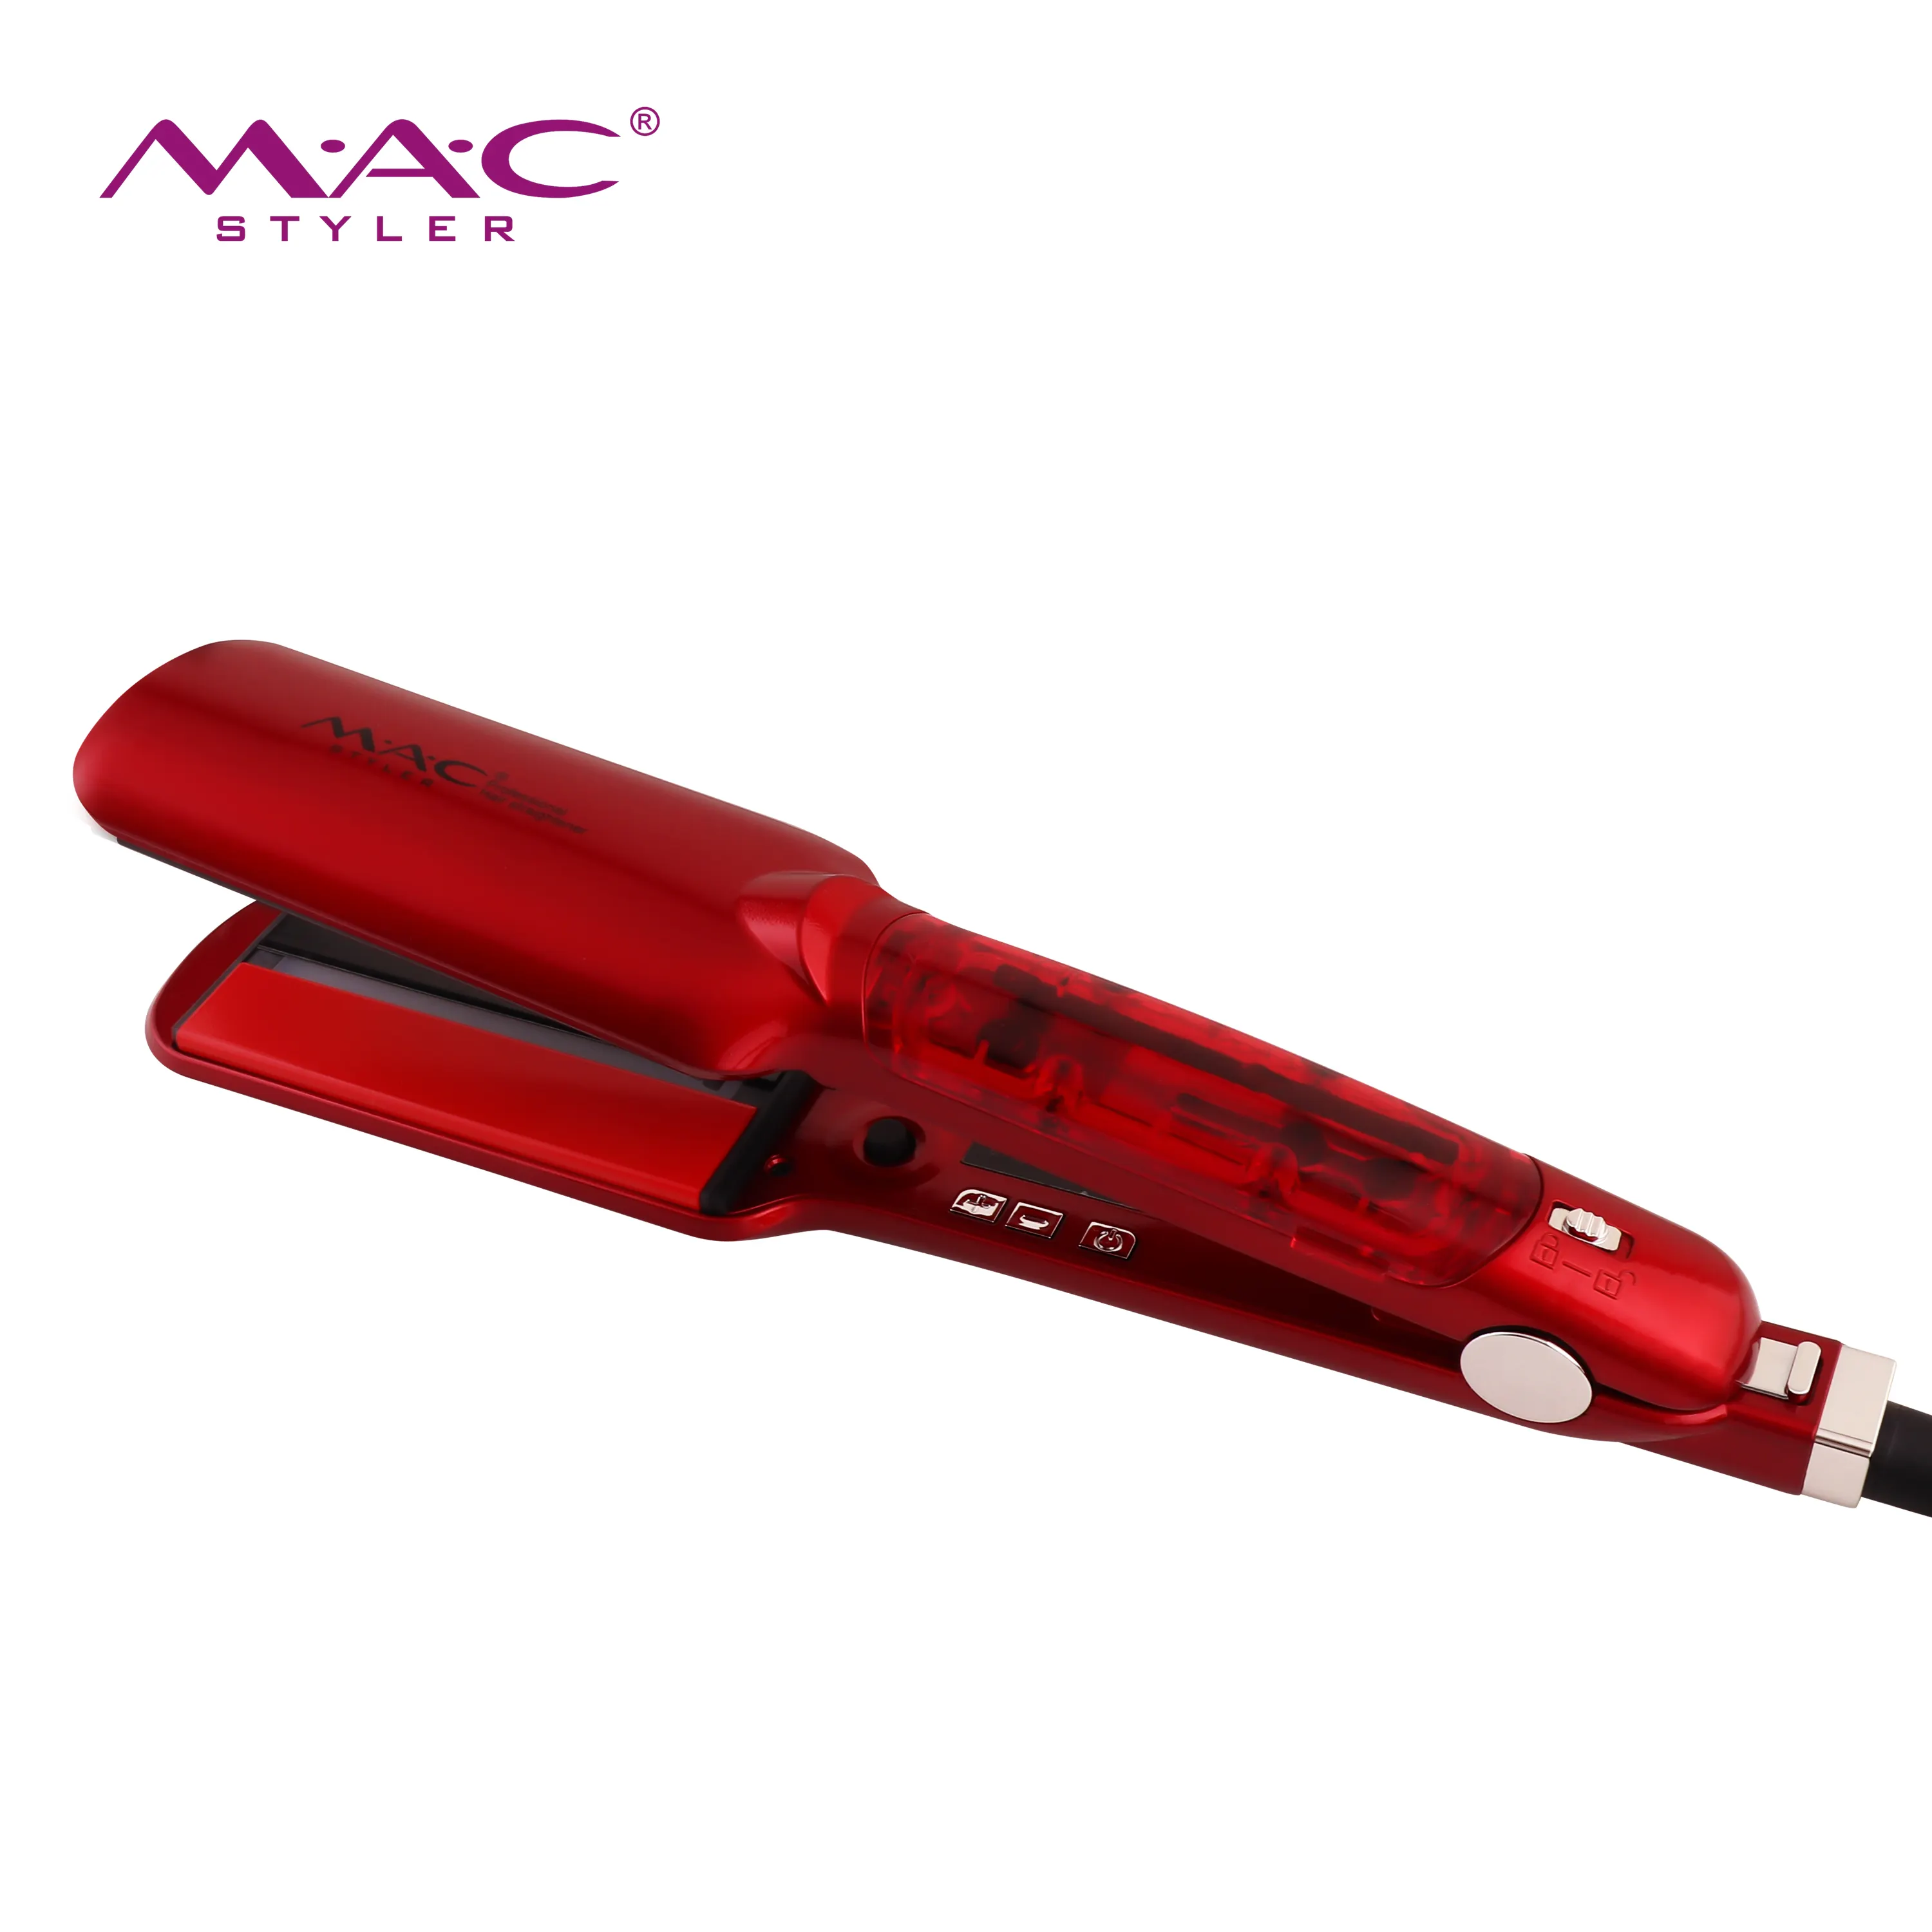 New Care Titanium Flat Iron LCD Digital Design Steam System With Water Tank Professional Hair Straightener